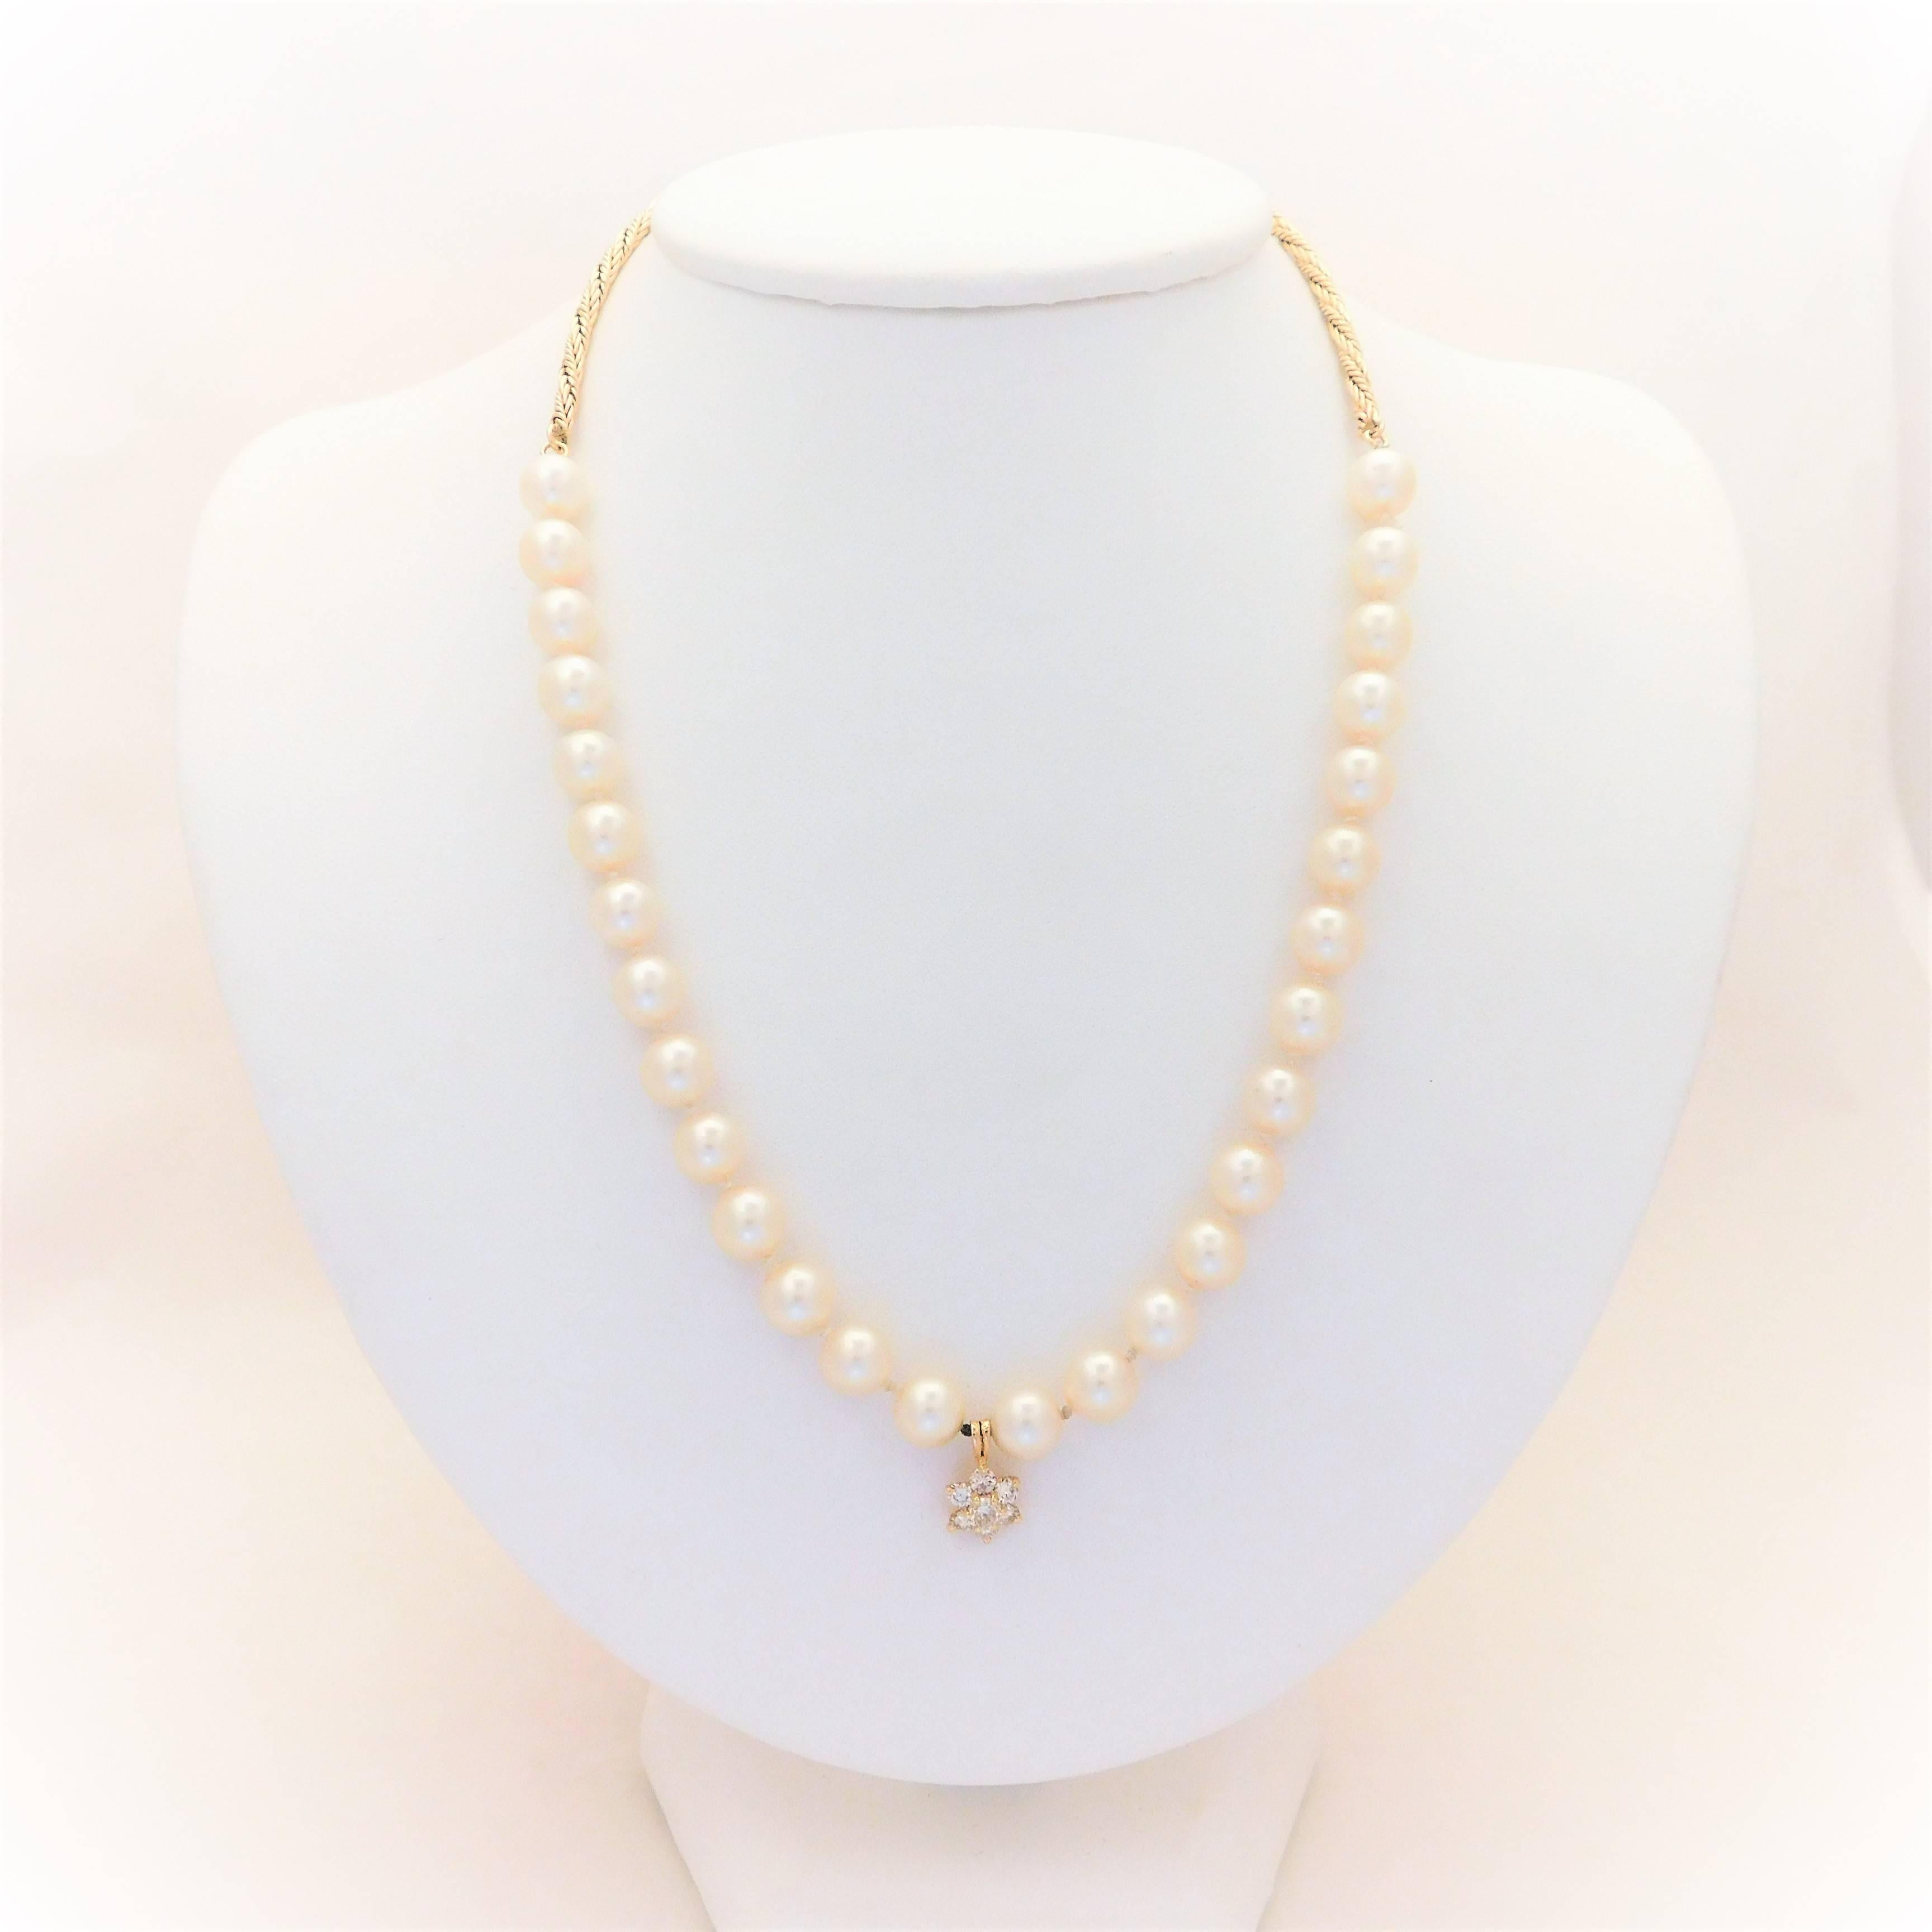 Midcentury White Pearl and 14 Karat Gold Necklace with Diamond Star Pendant 1